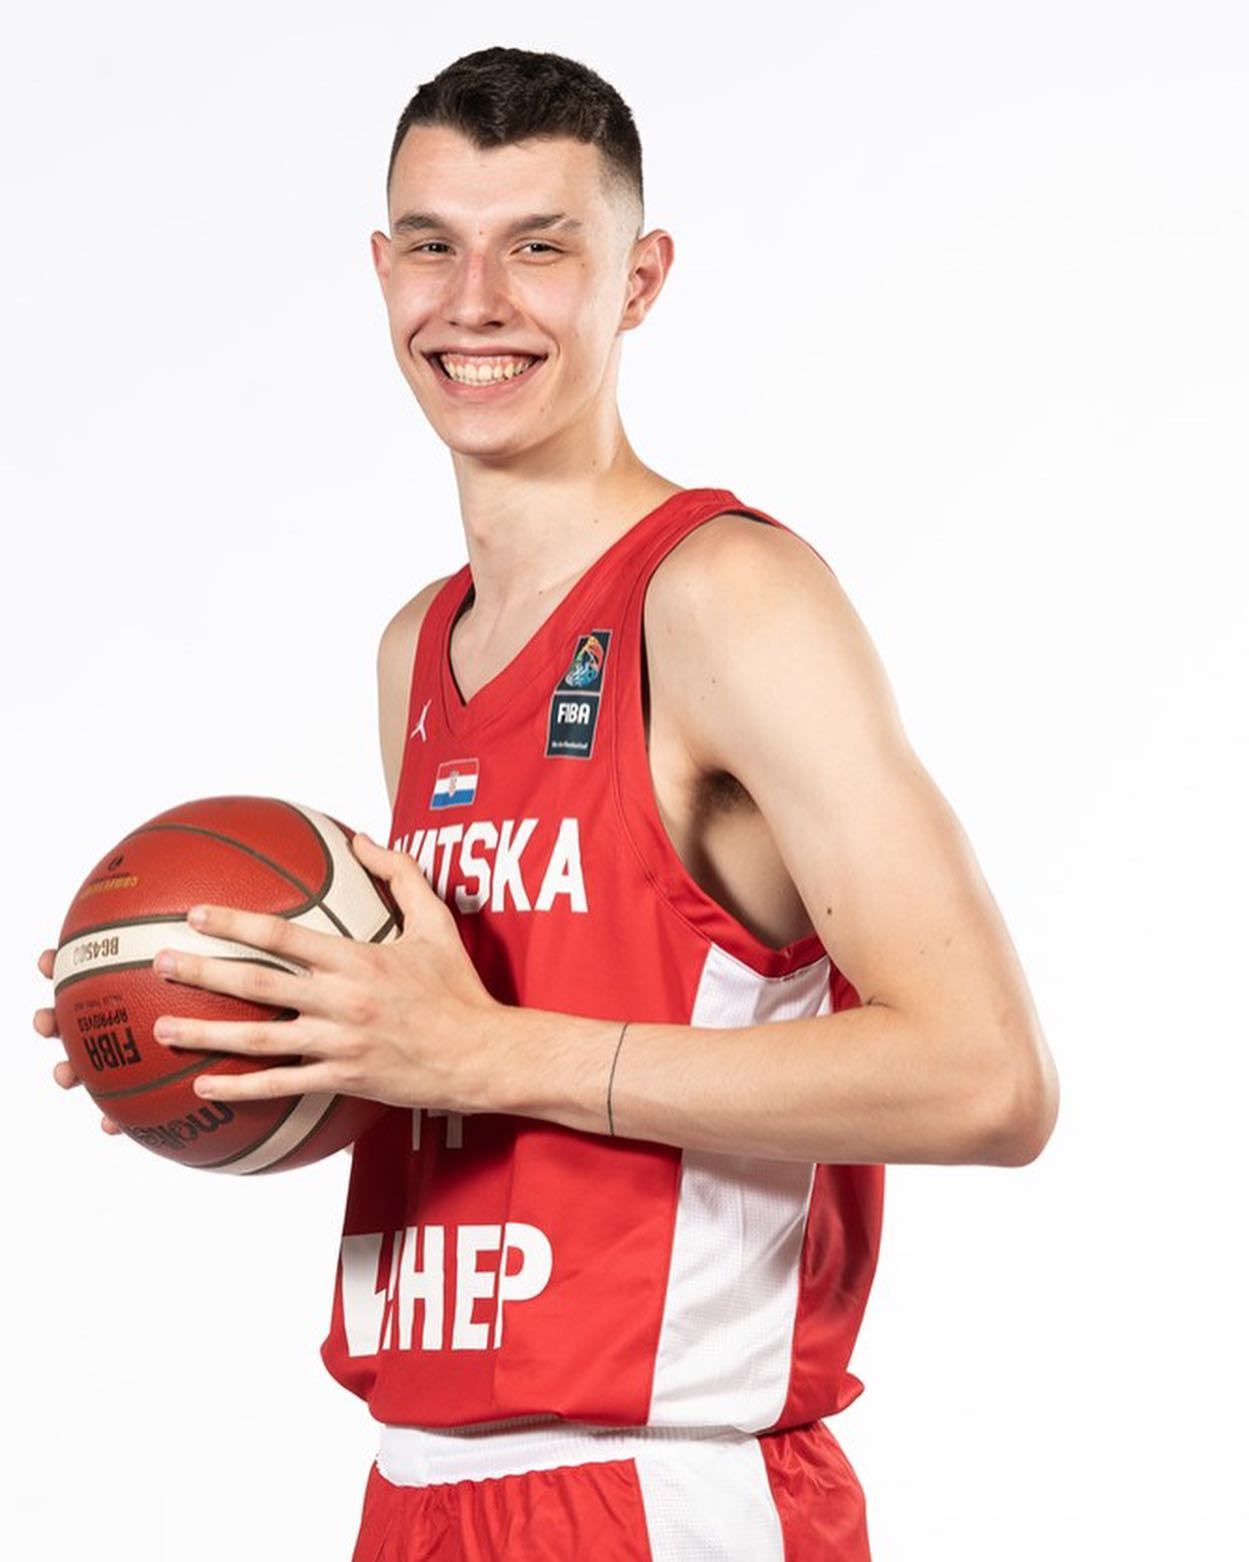 Zvonimir Ivisic Is A Croatian Basketball Player